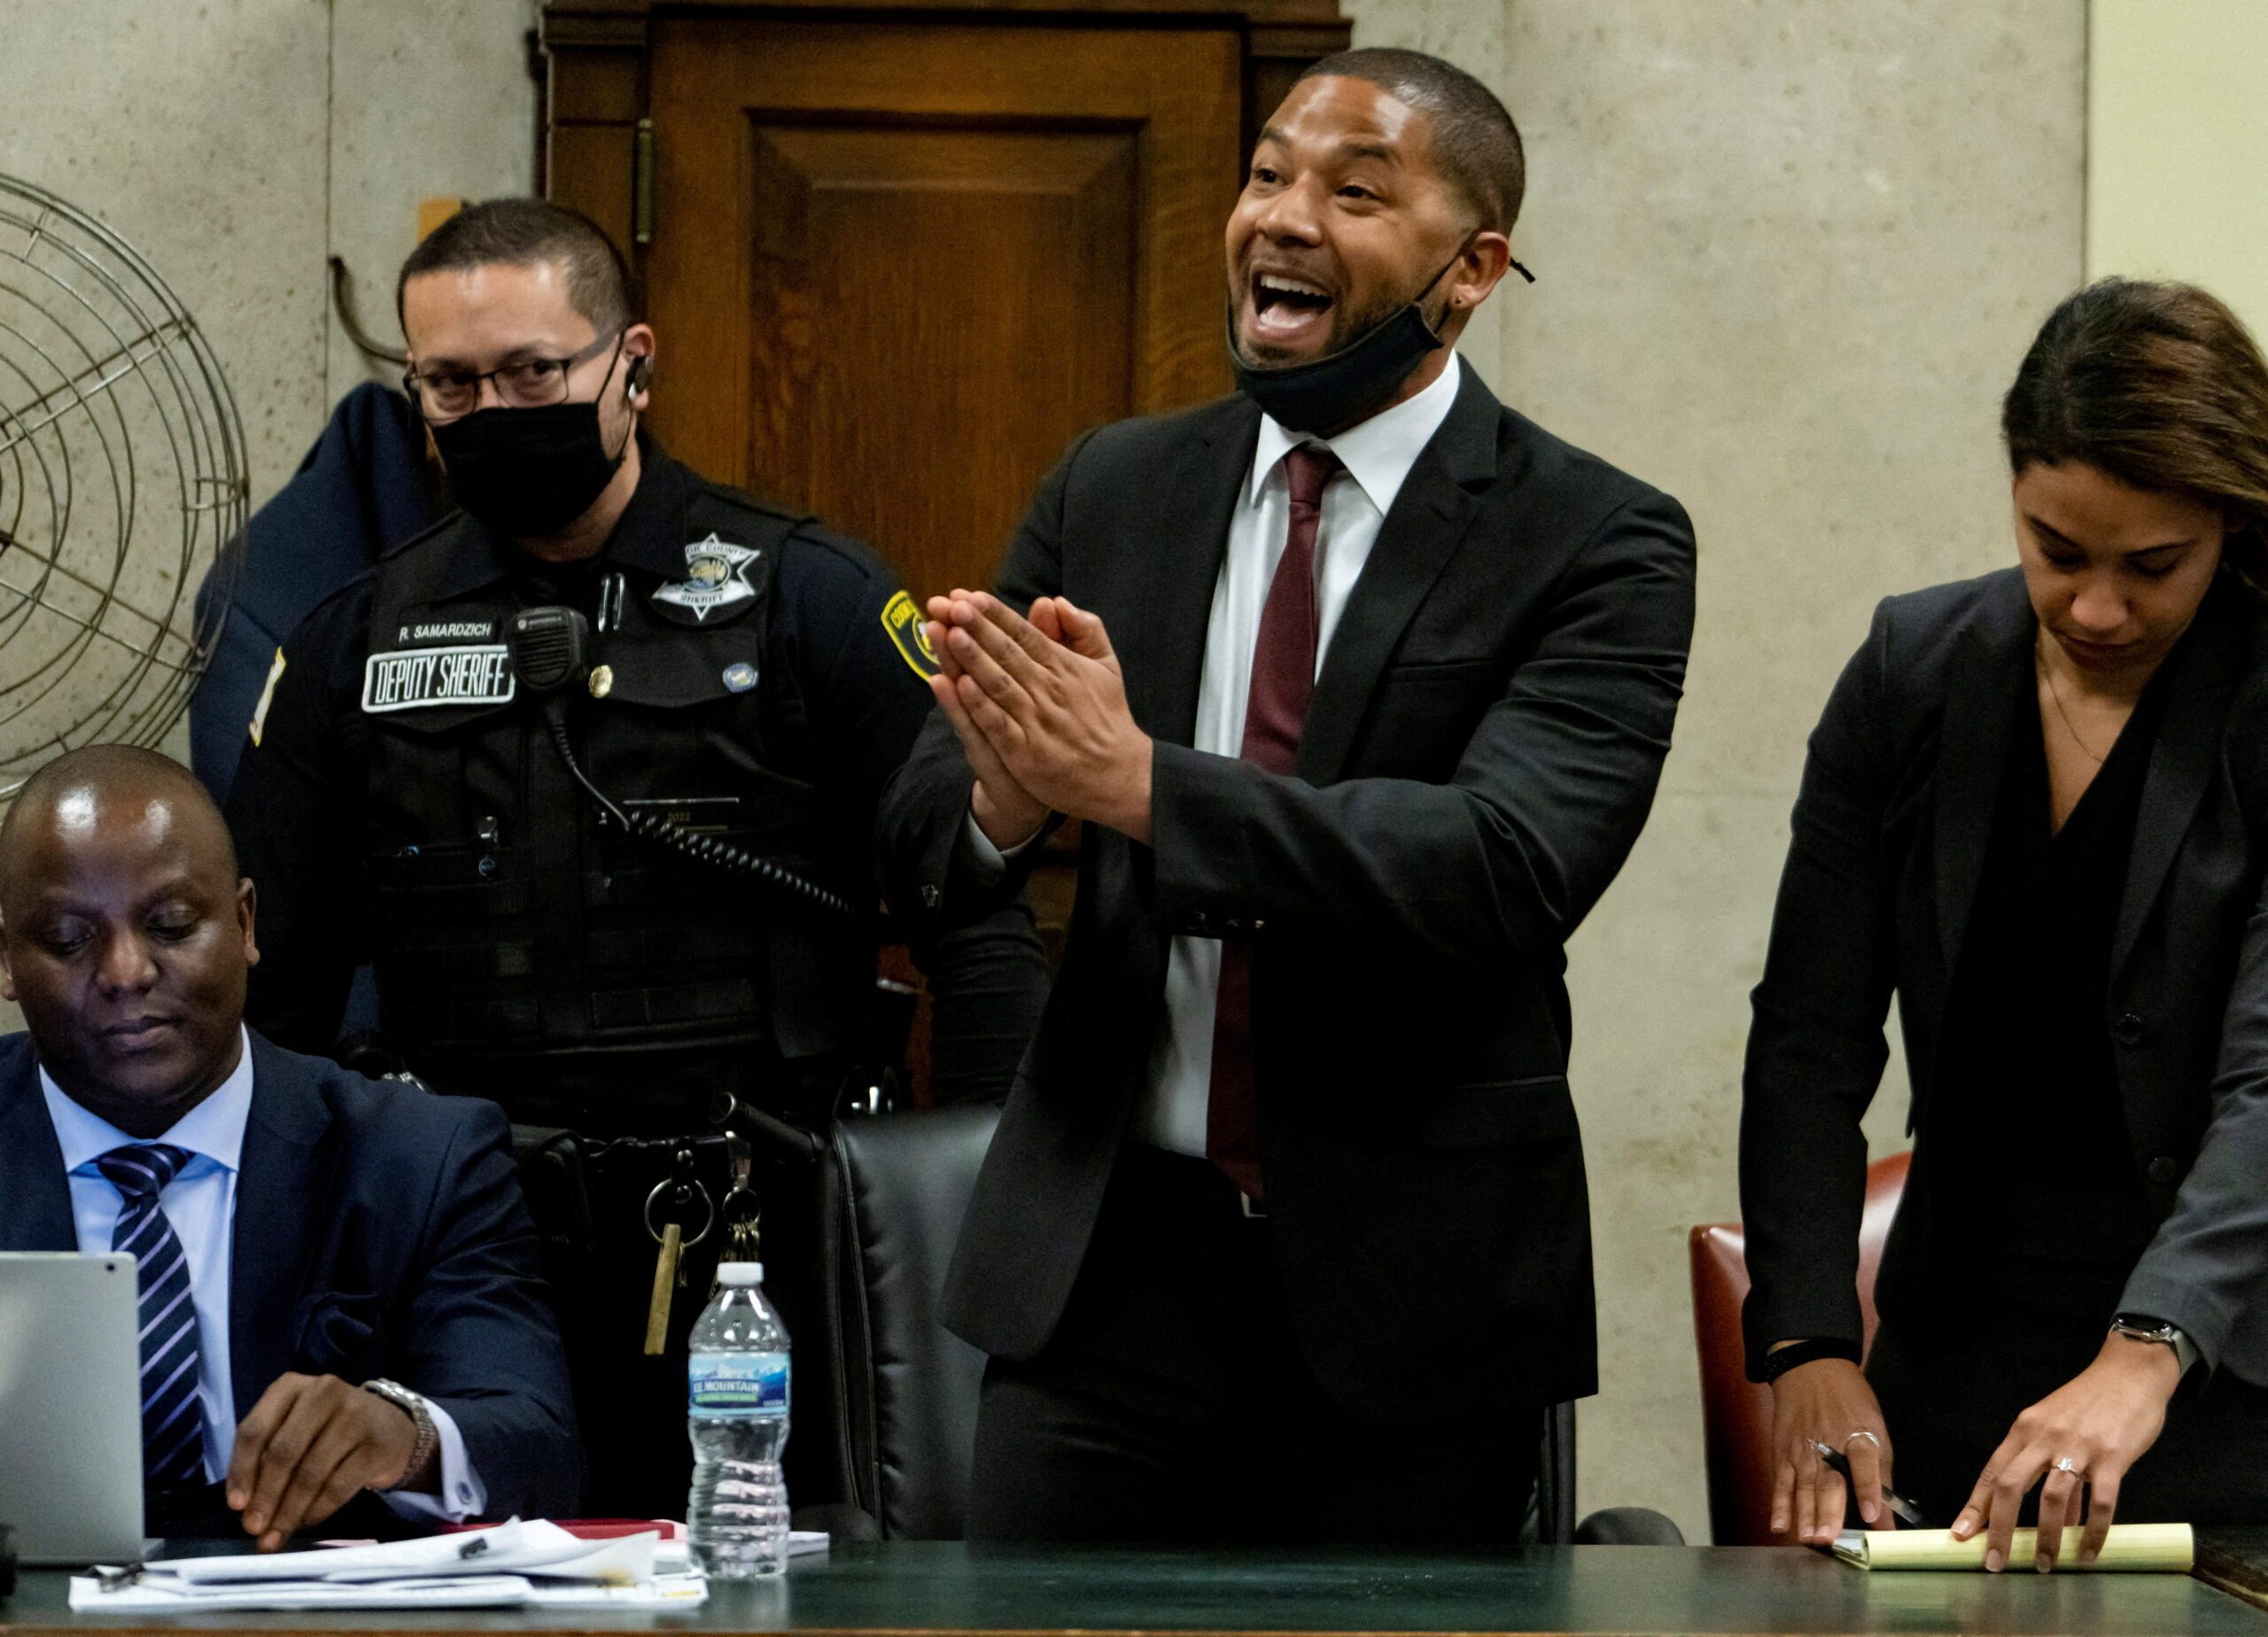 Jussie Smollett to be released from jail while appealing conviction